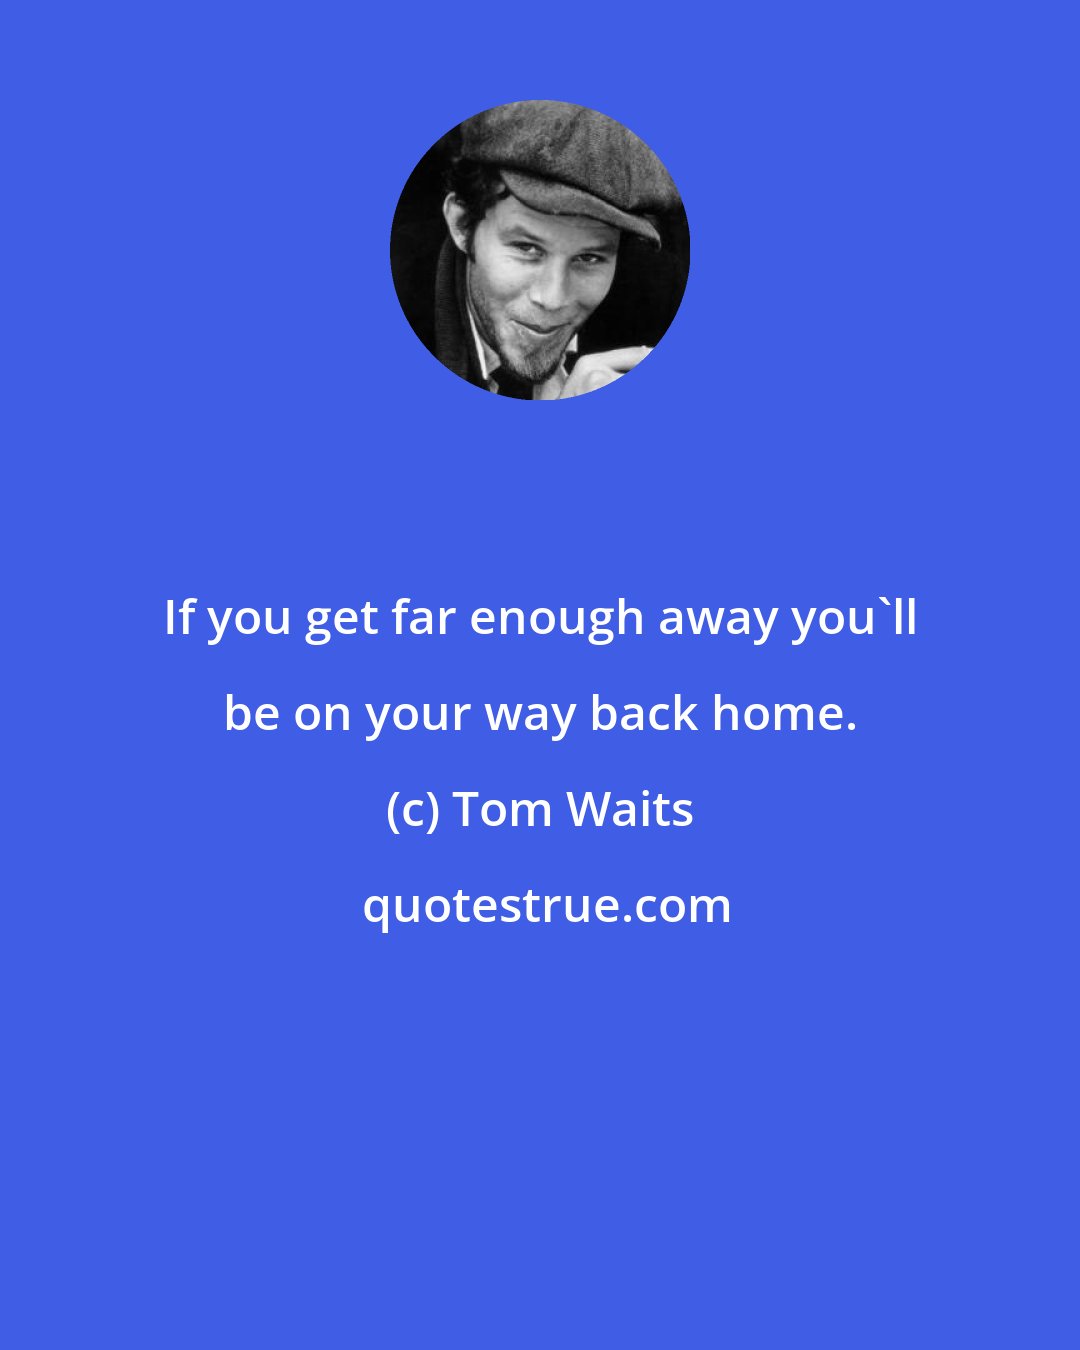 Tom Waits: If you get far enough away you'll be on your way back home.